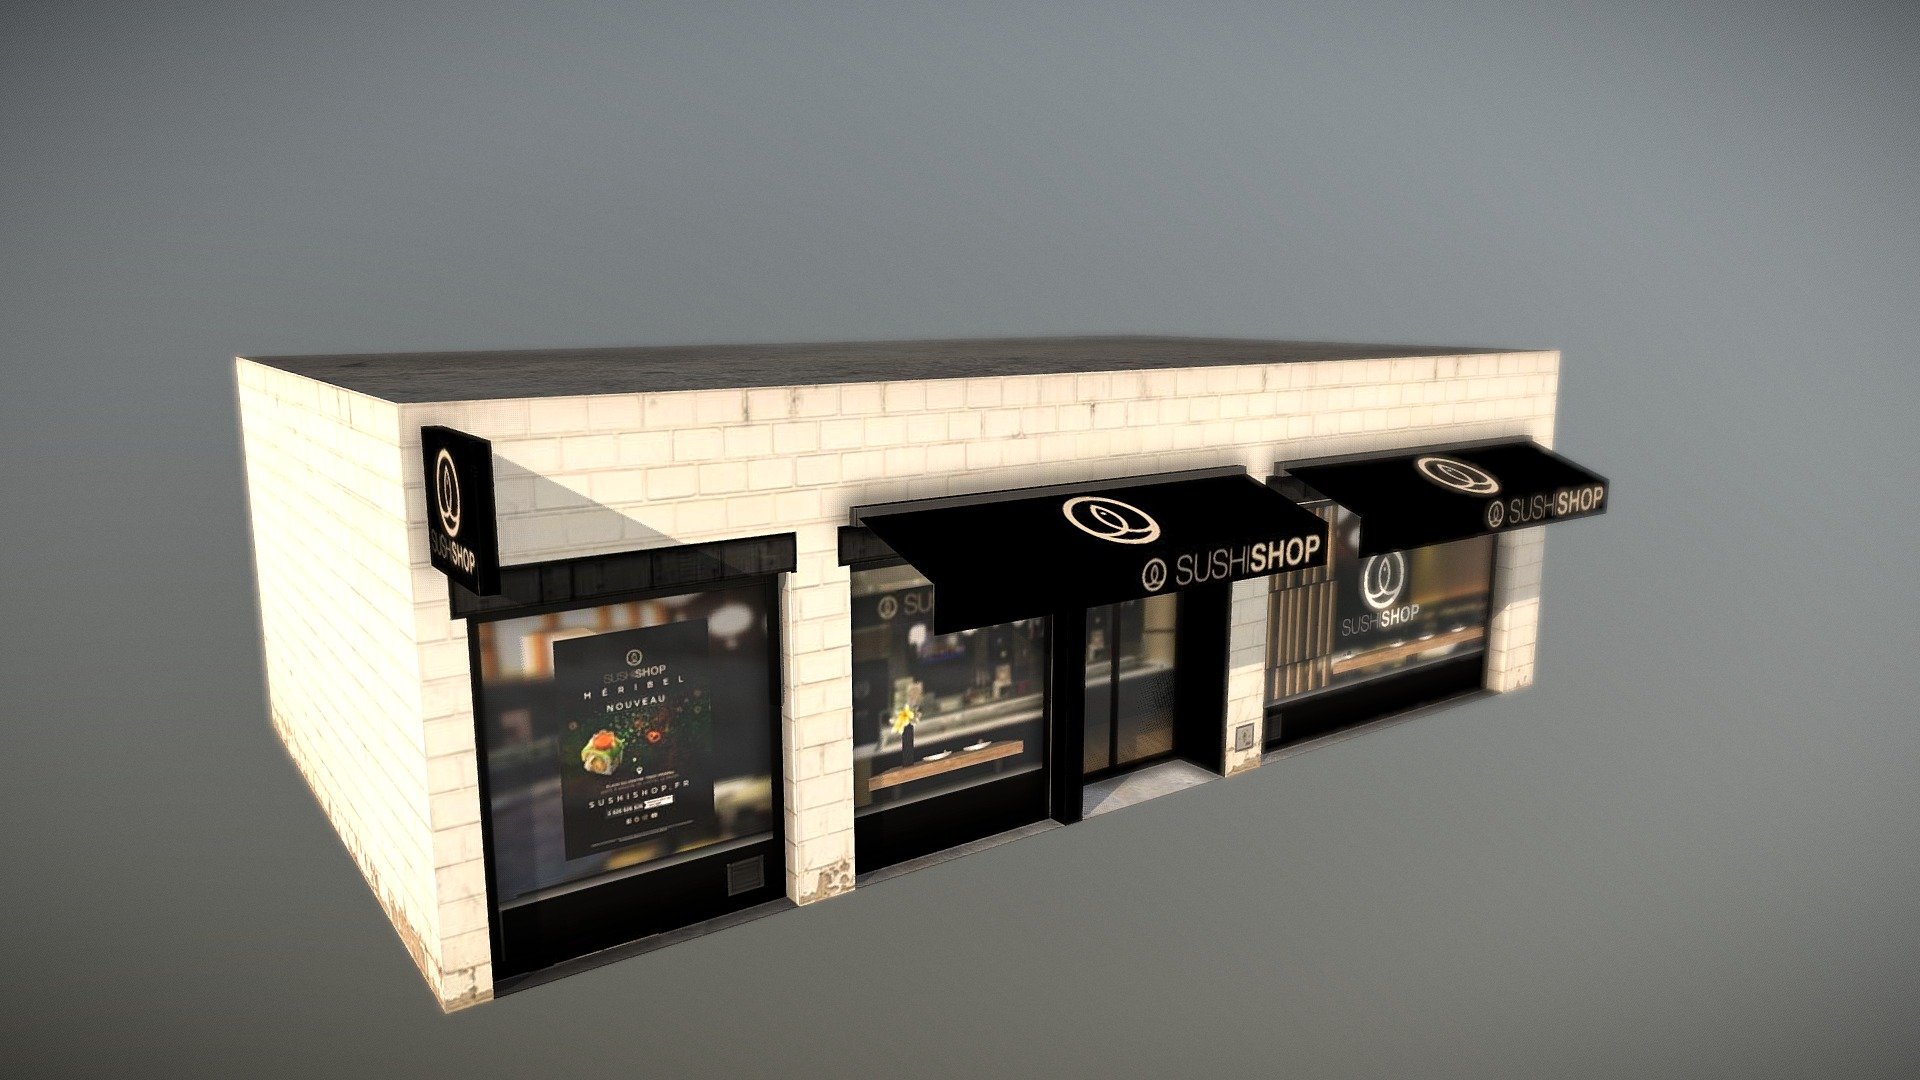 SushiShop is a Japanese style fast-food chain founded in France in 1998.
Asset created for Cities:Skylines 3d model